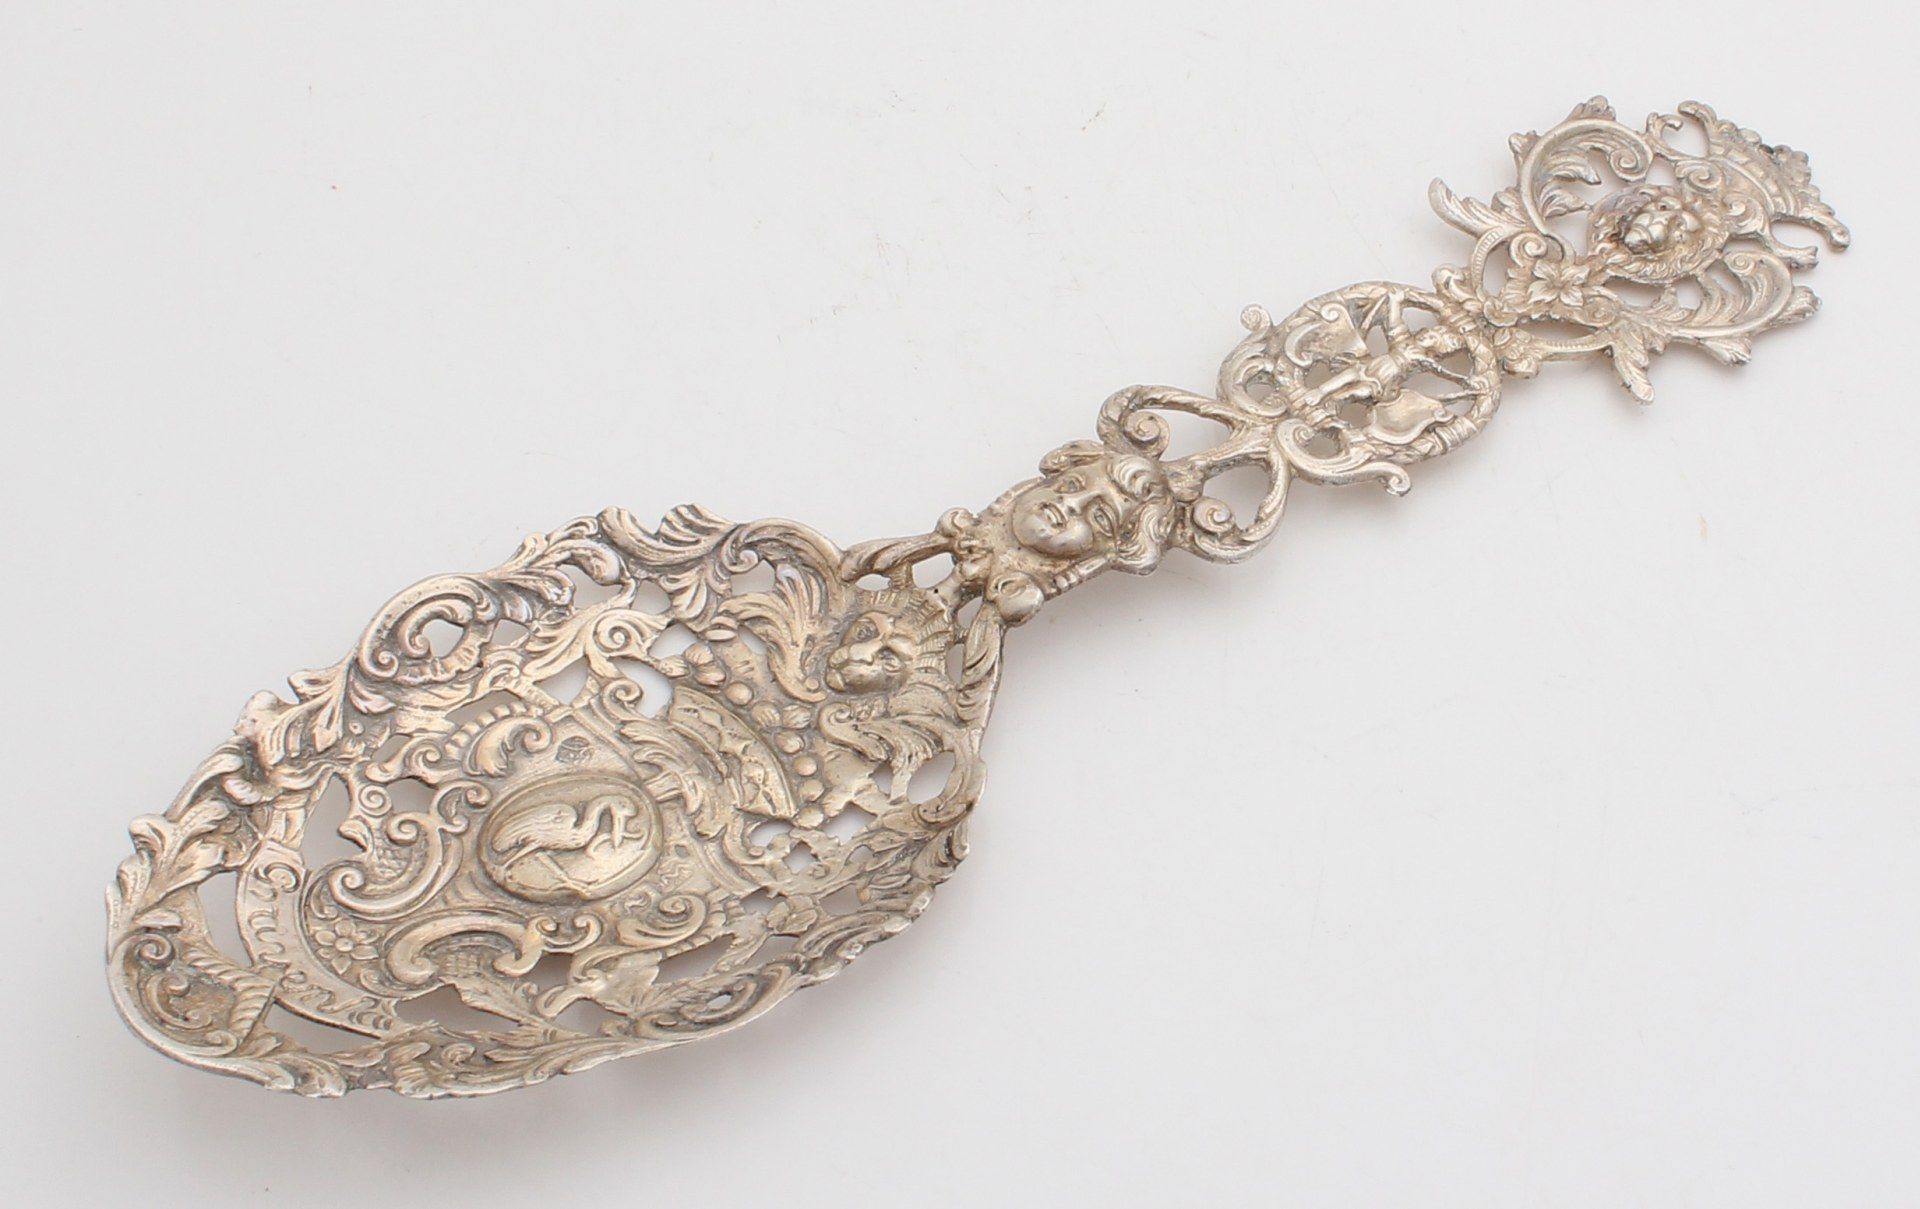 Fine silver shovel, 835/000. Openwork shovel richly decorated with curls and flowers in the middle